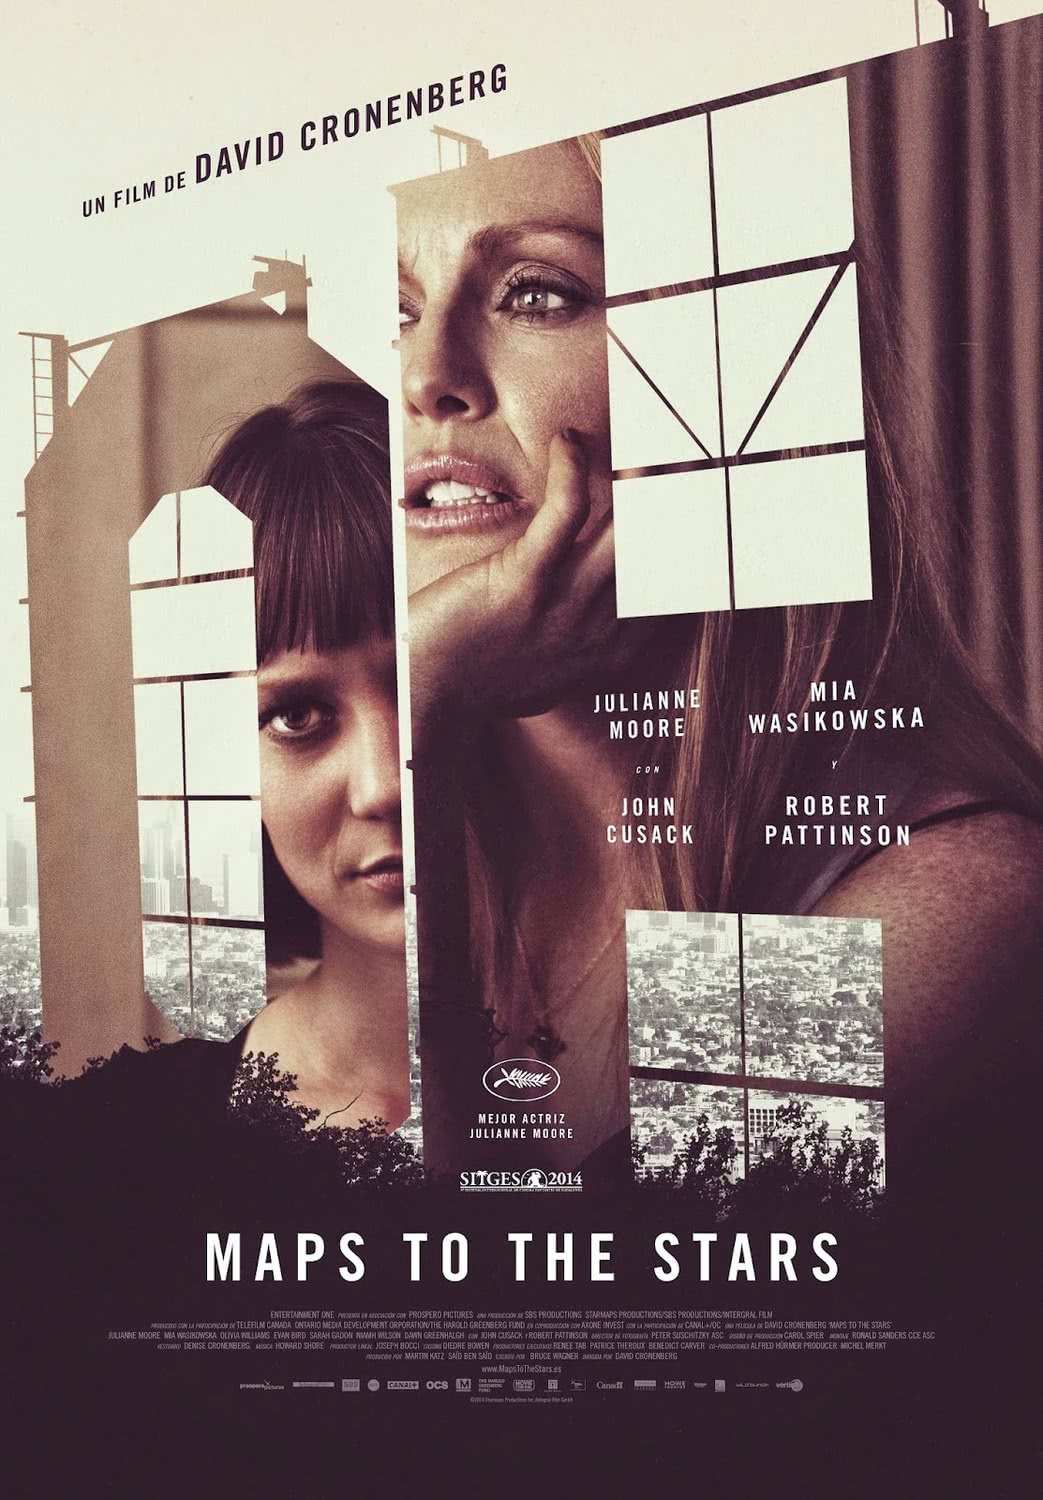 Maps to the stars Cartel